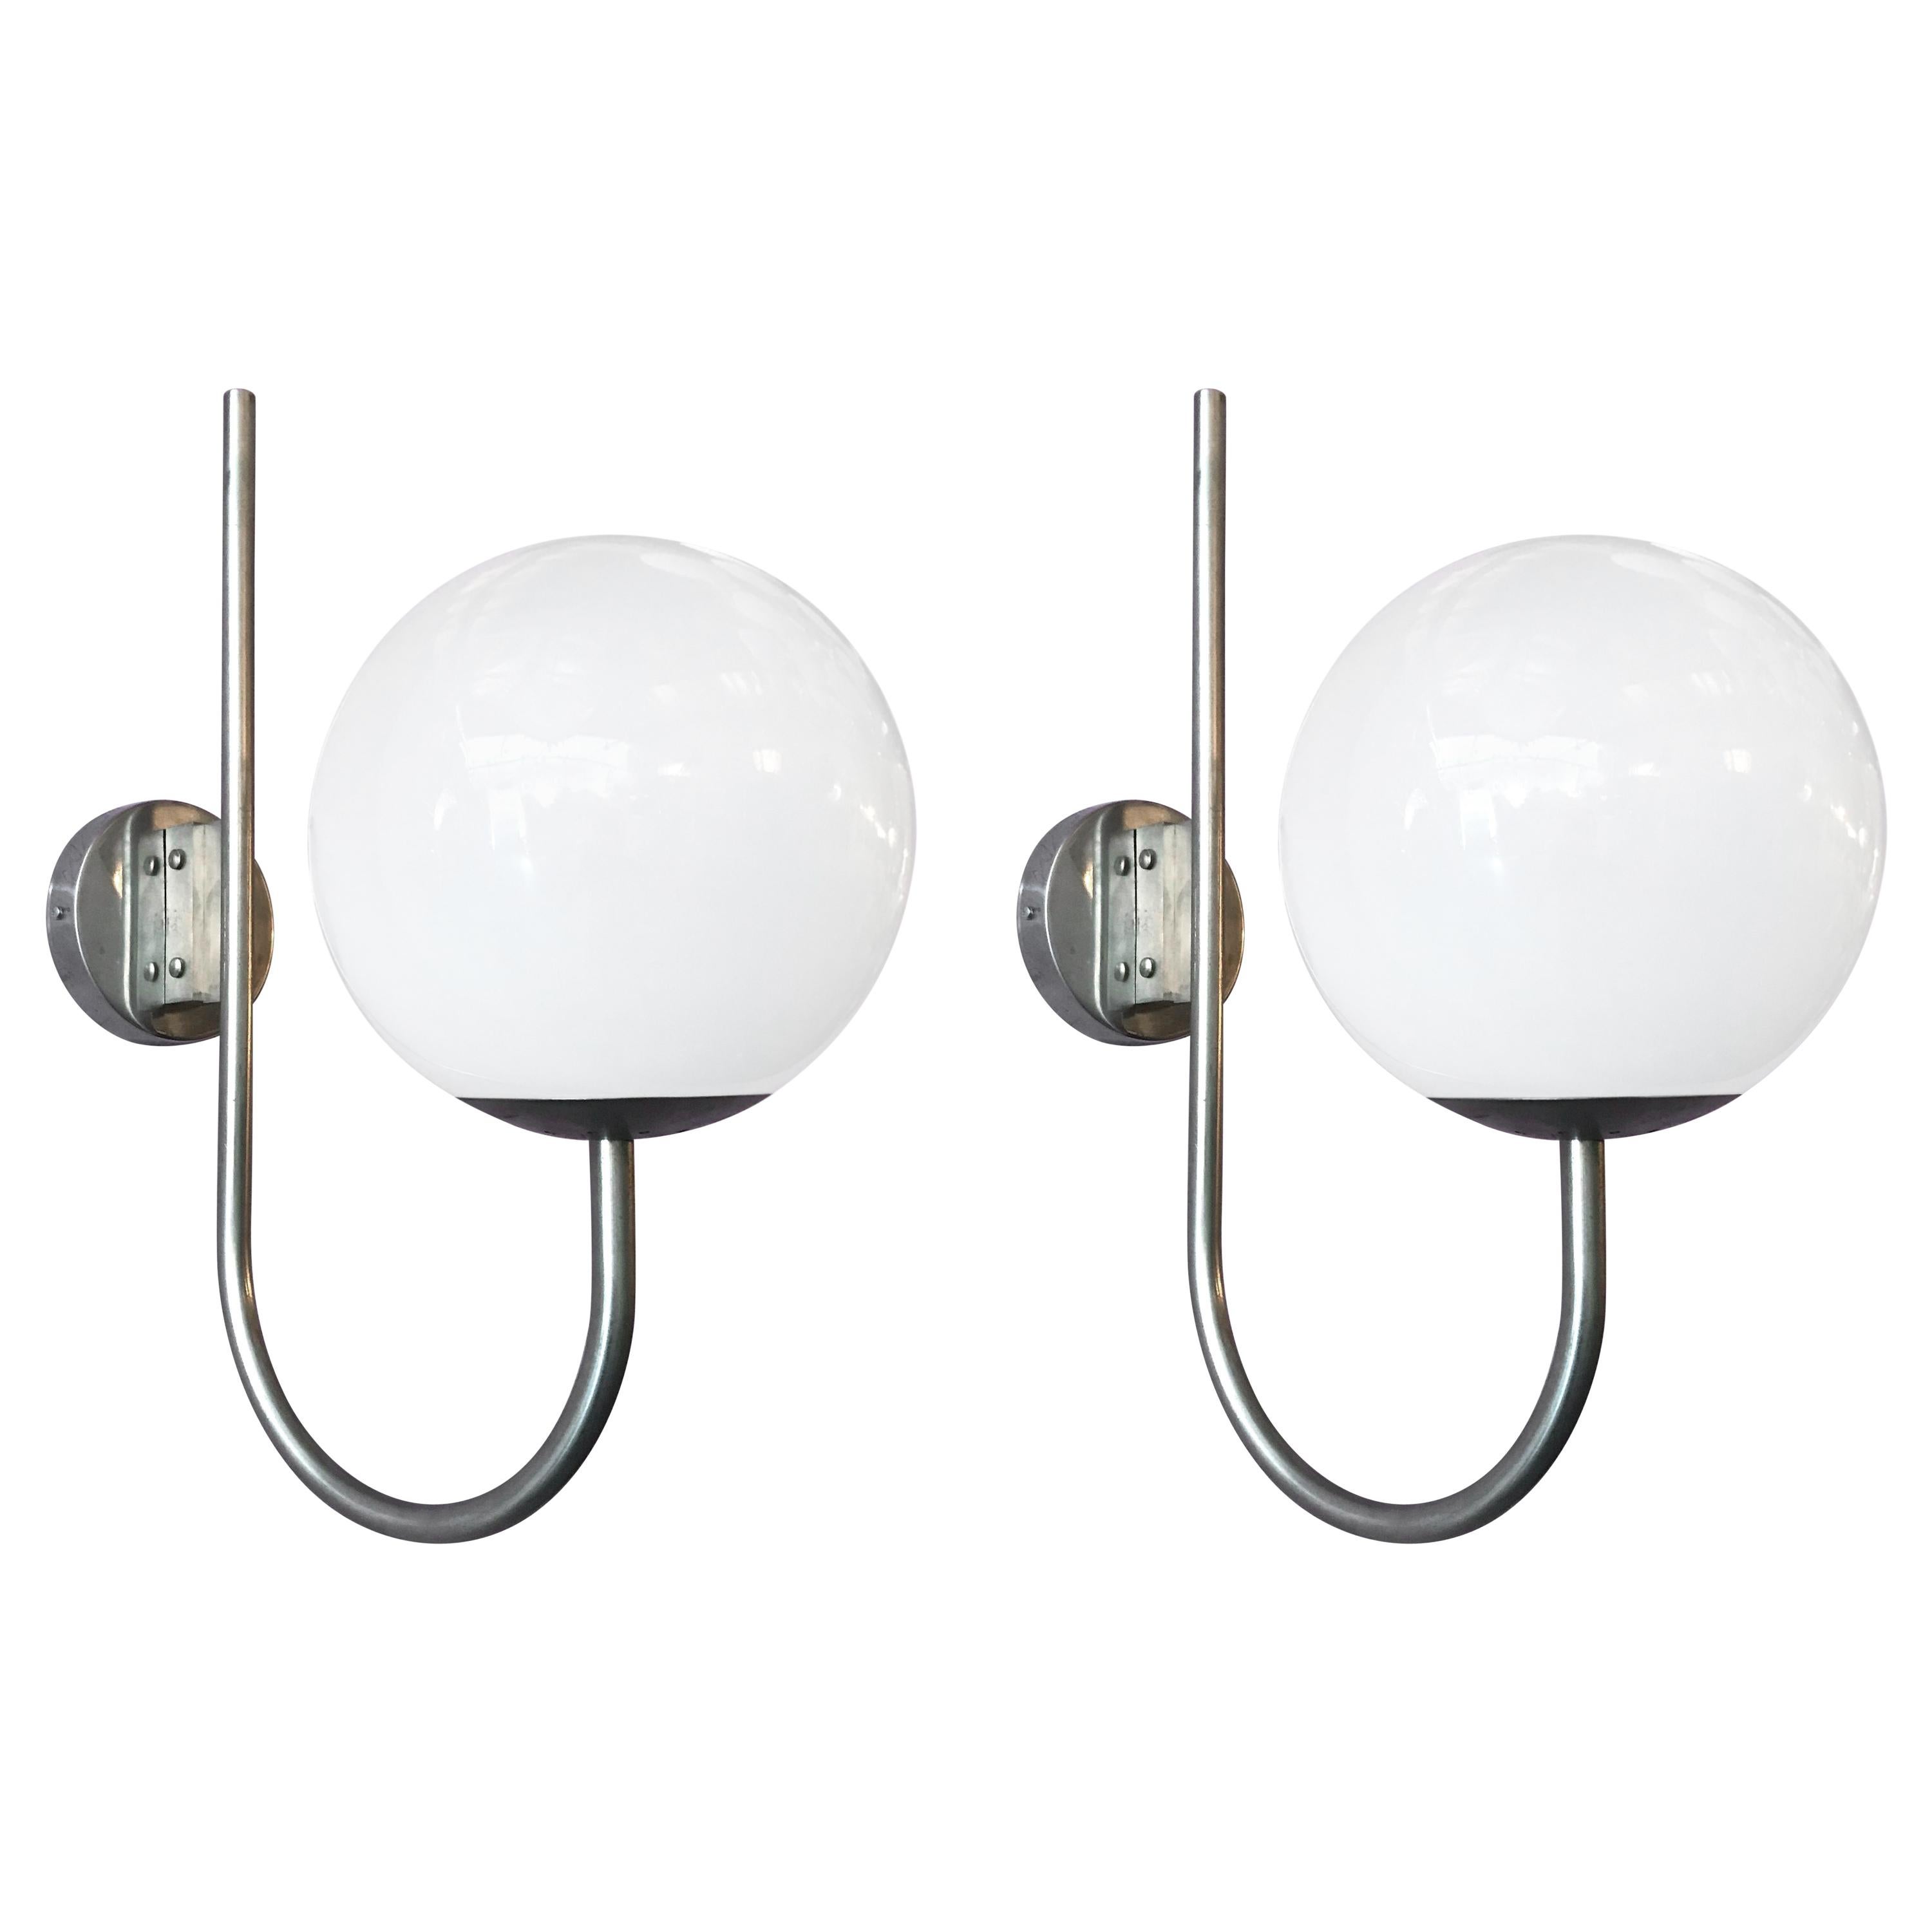 Pair of Globe Sconces by Sergio Mazza FINAL CLEARANCE SALE